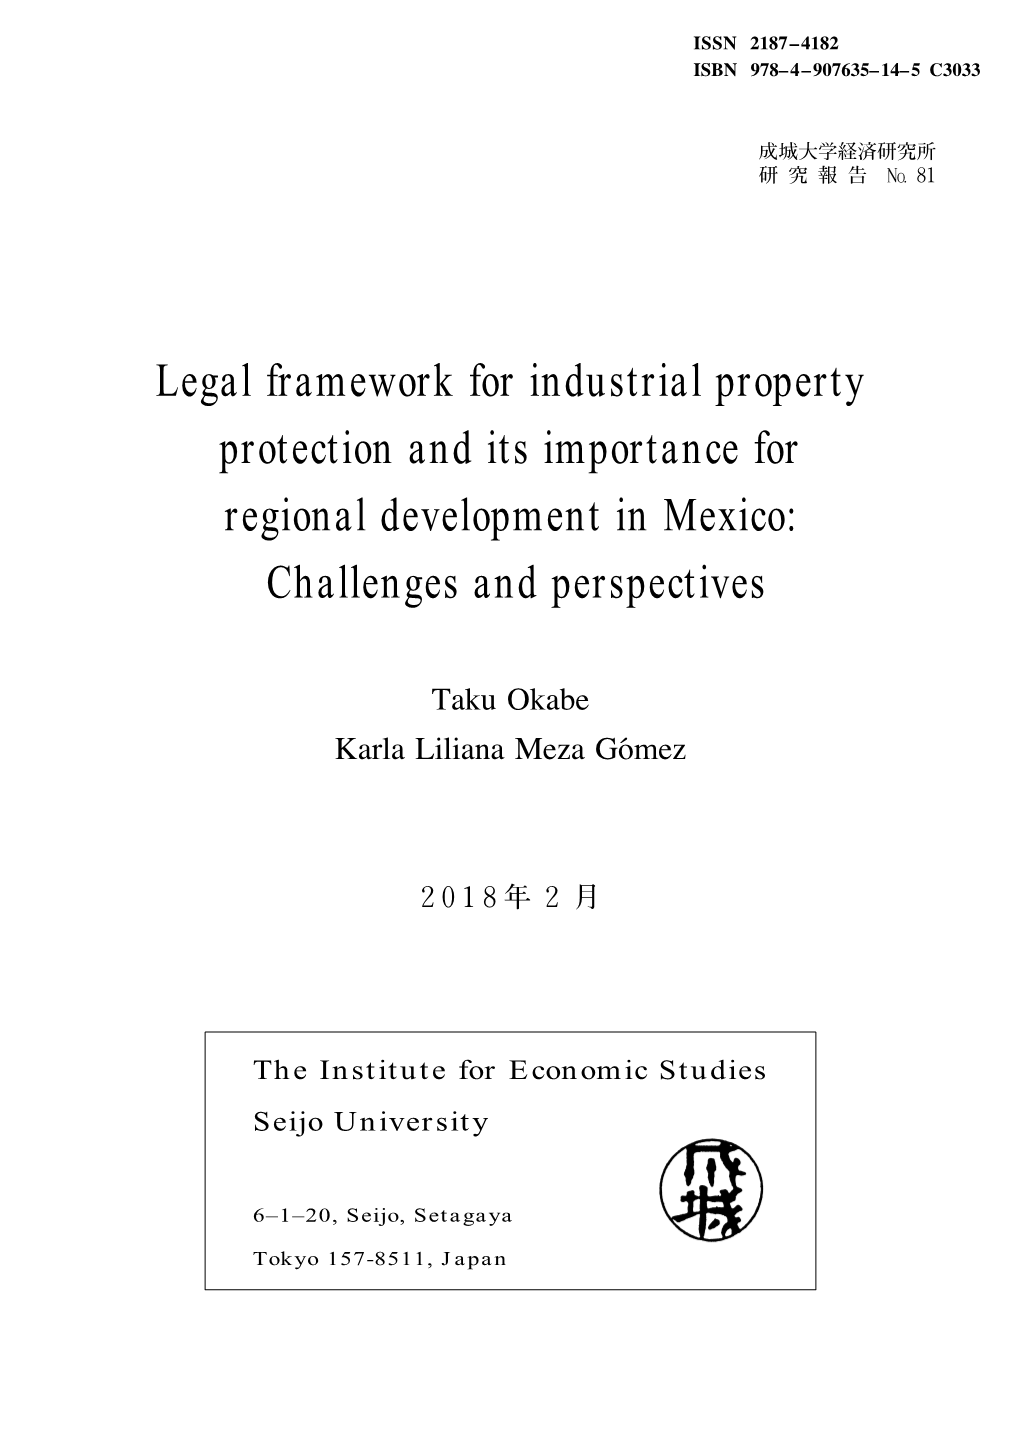 Legal Framework for Industrial Property Protection and Its Importance for Regional Development in Mexico: Challenges and Perspectives